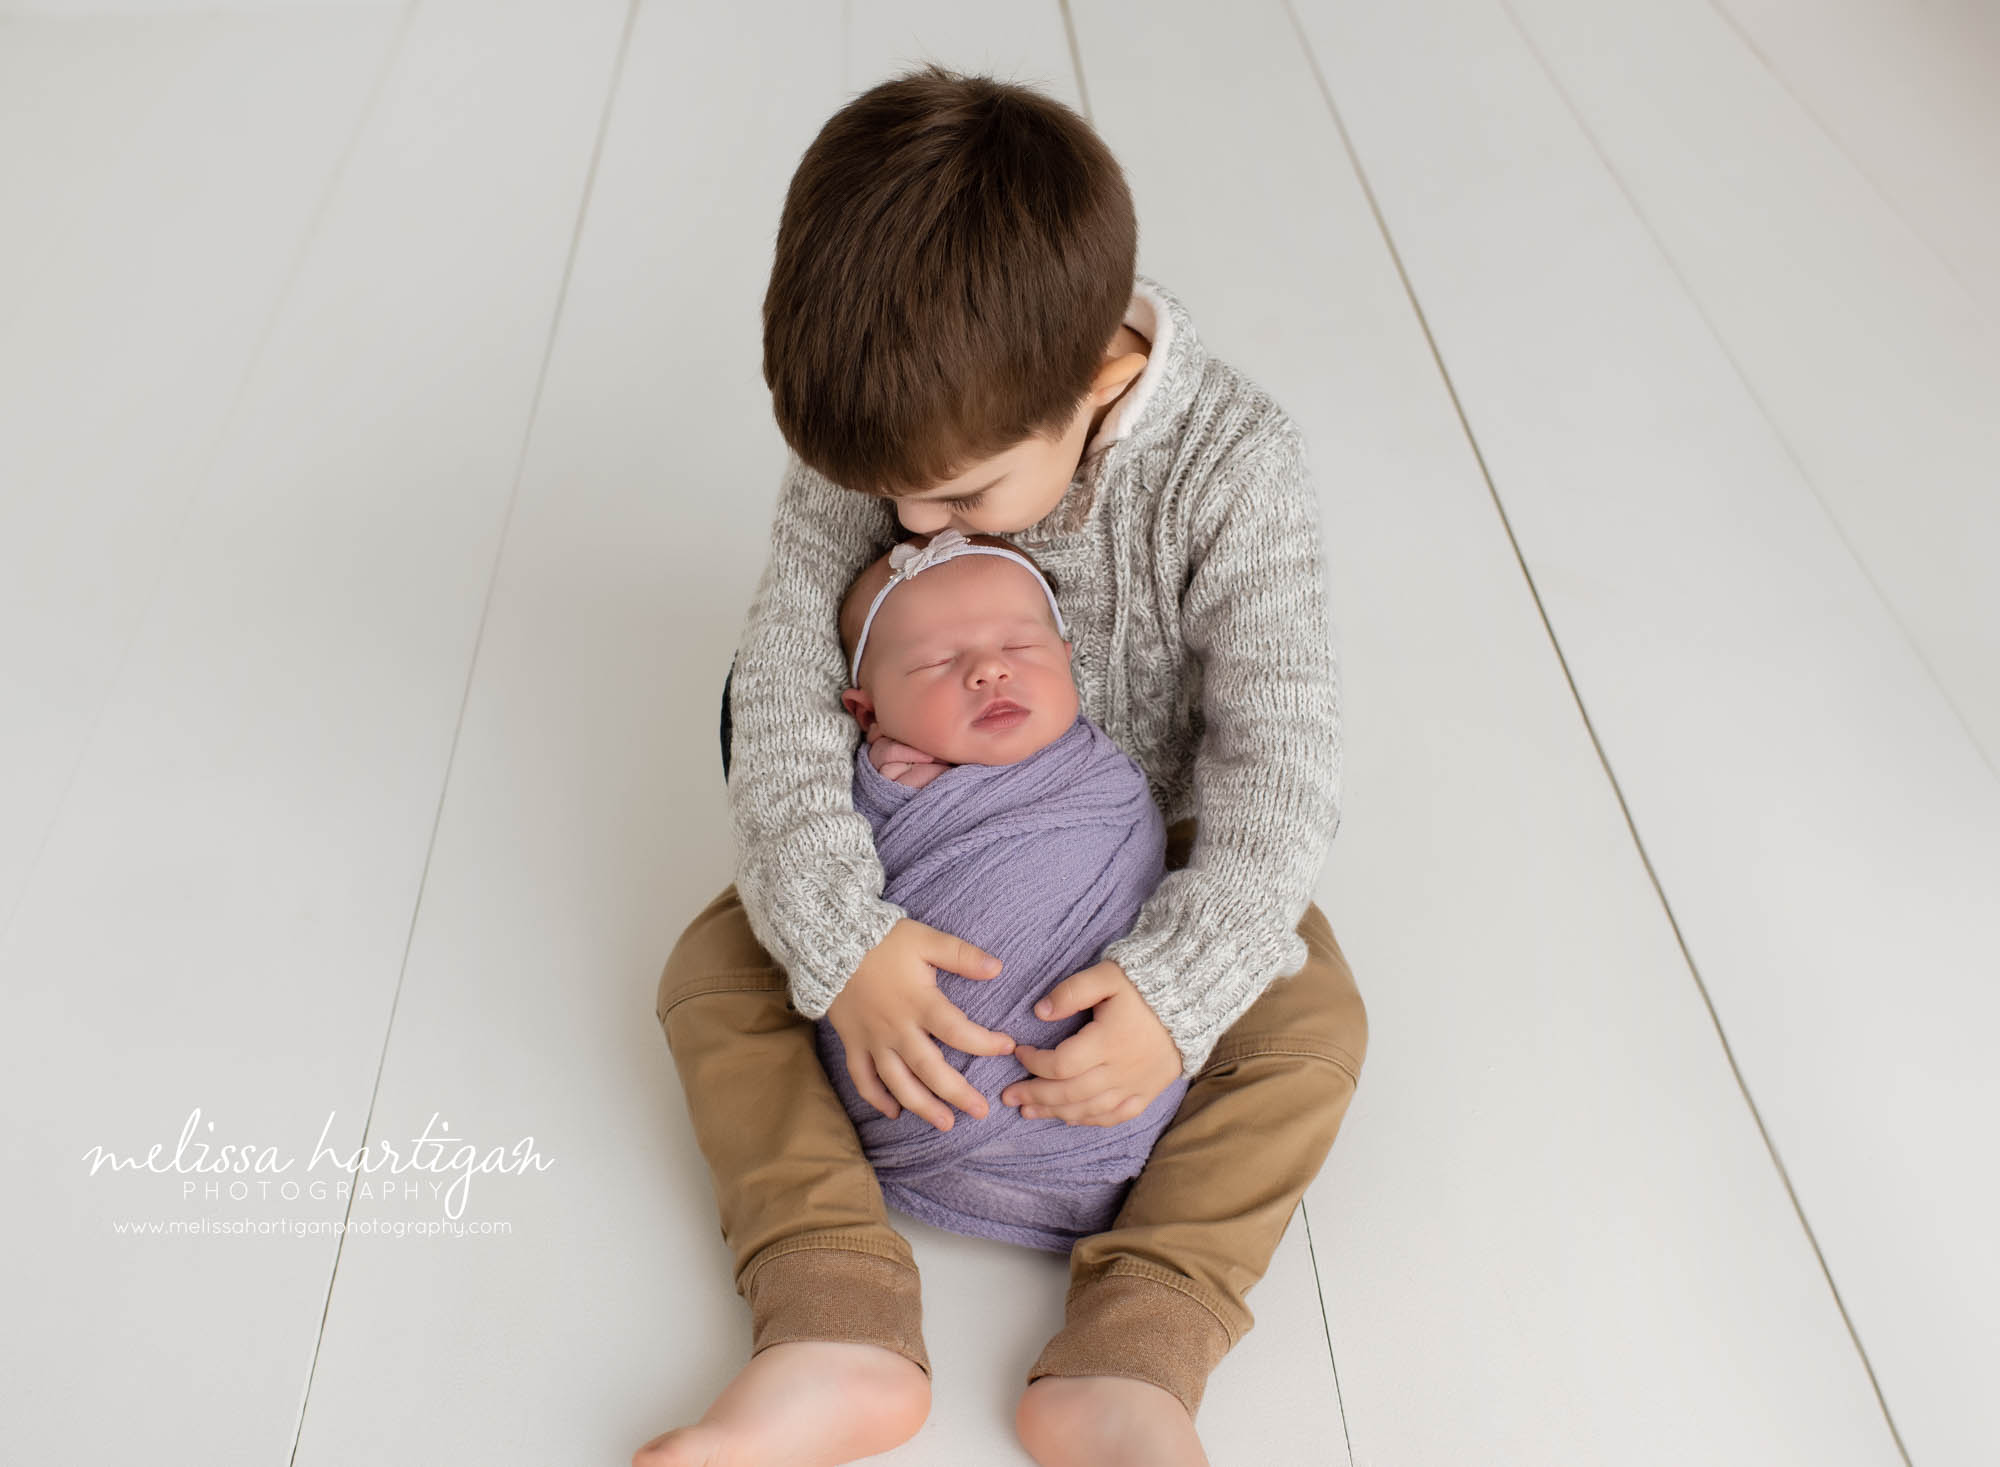 toddler big brother sitting on floor with newborn baby sister between his legs giving her a kiss on her head